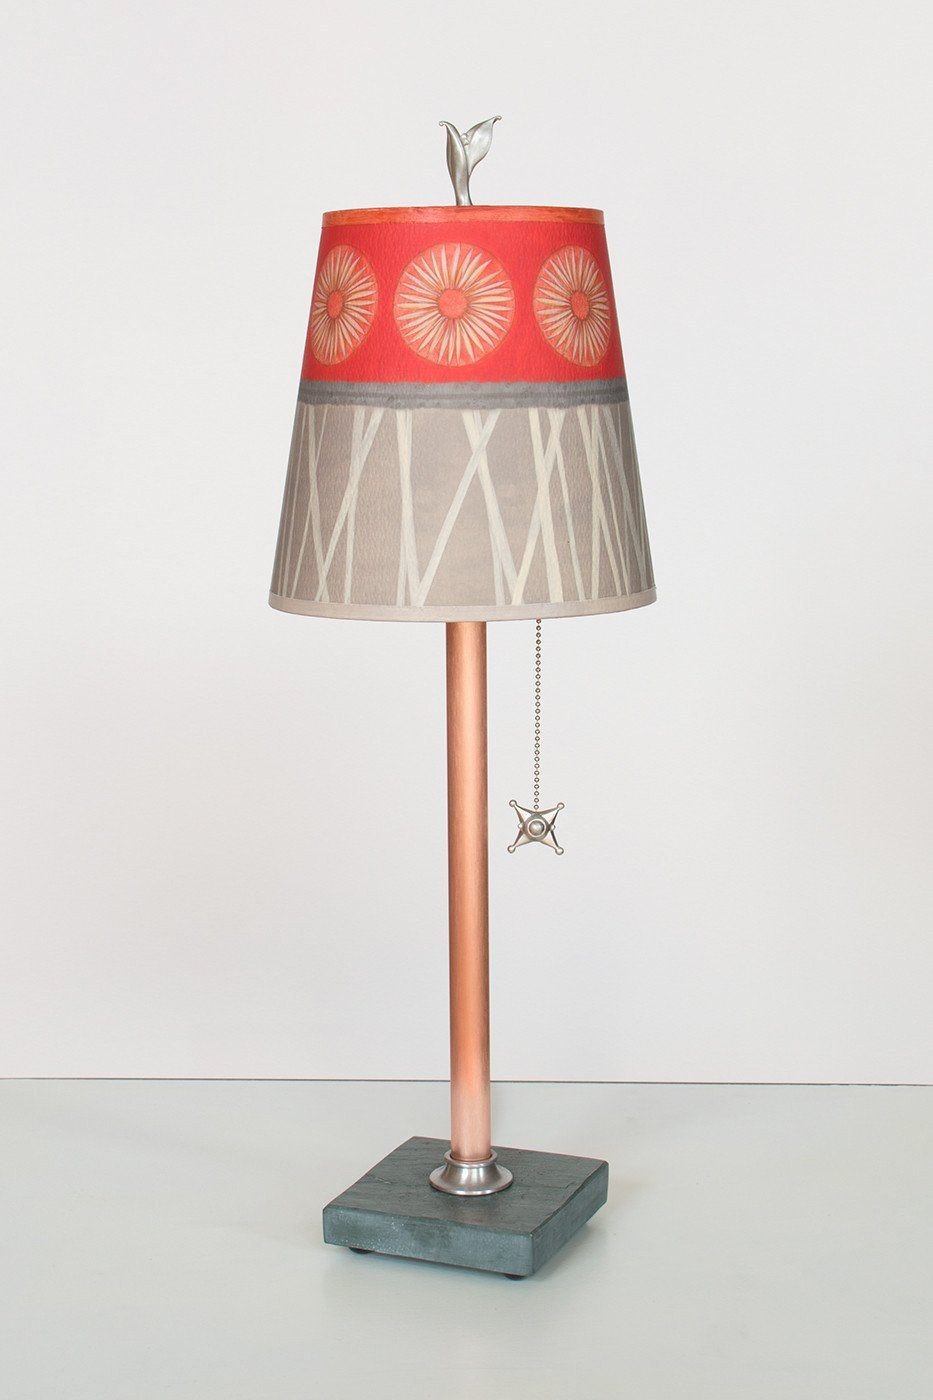 Copper Table Lamp on Vermont Slate Base with Small Drum Shade in Tang Lit